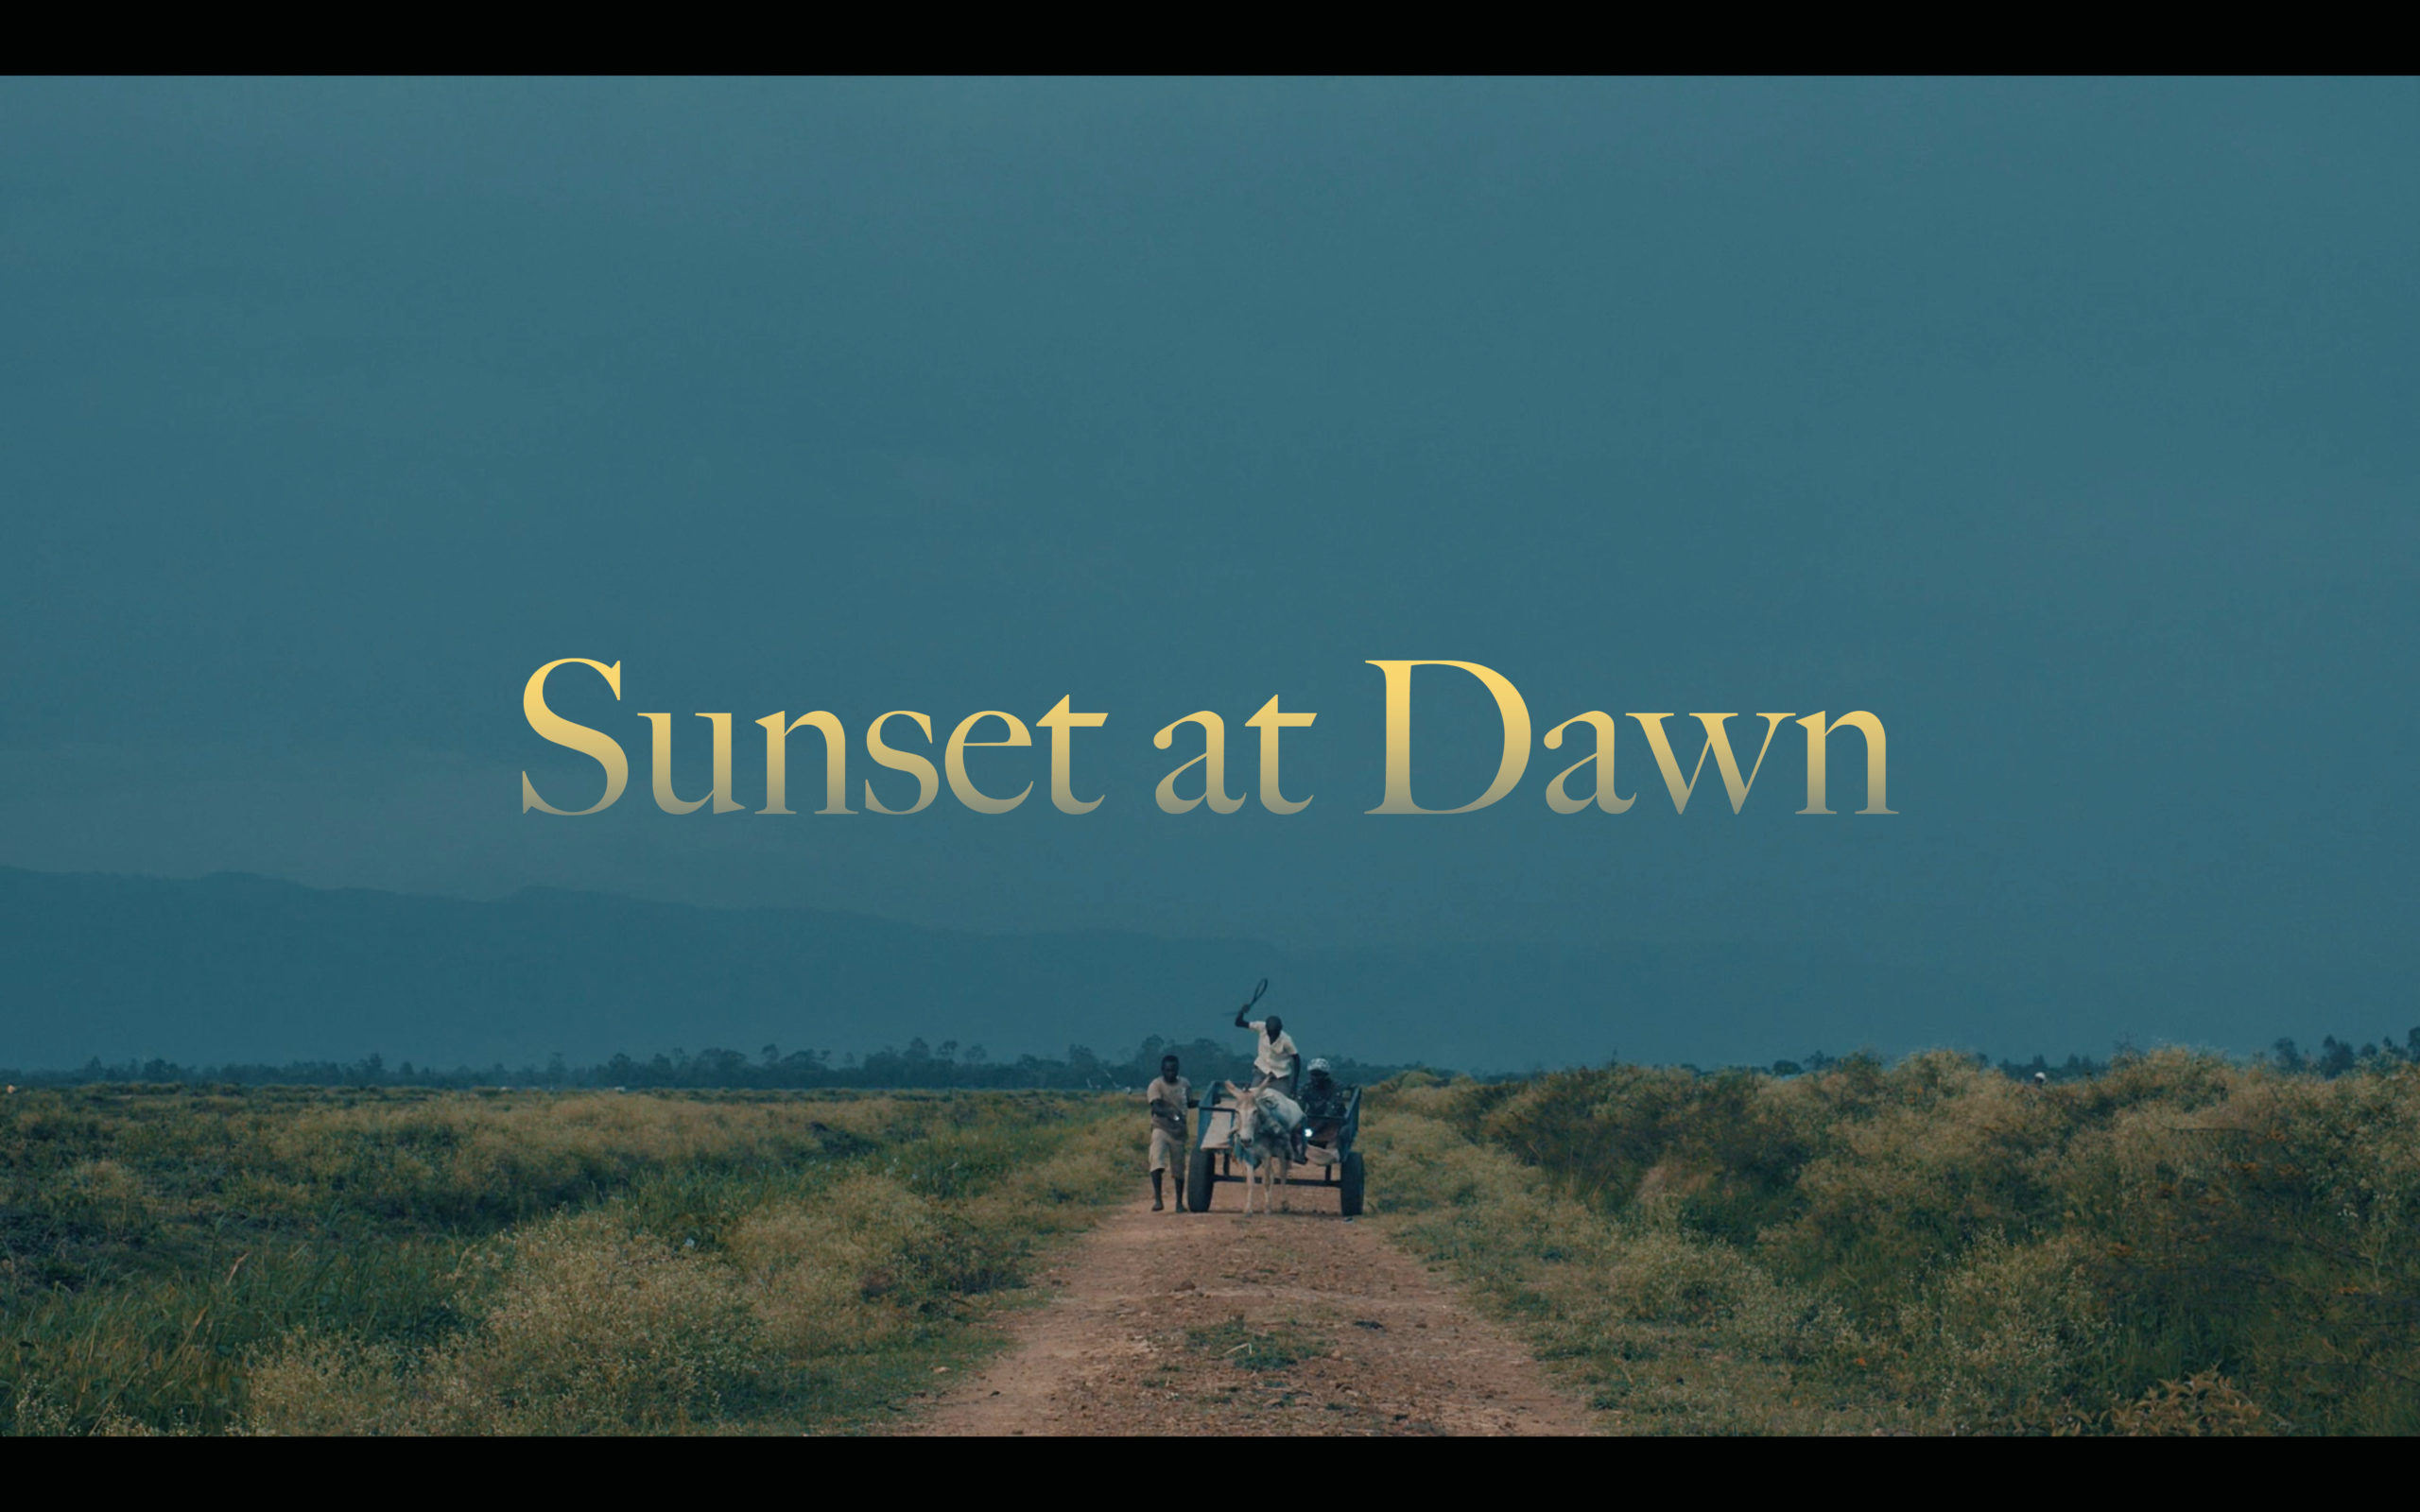 title image for the film Sunset at Dawn. The image features a view of Keyan fields